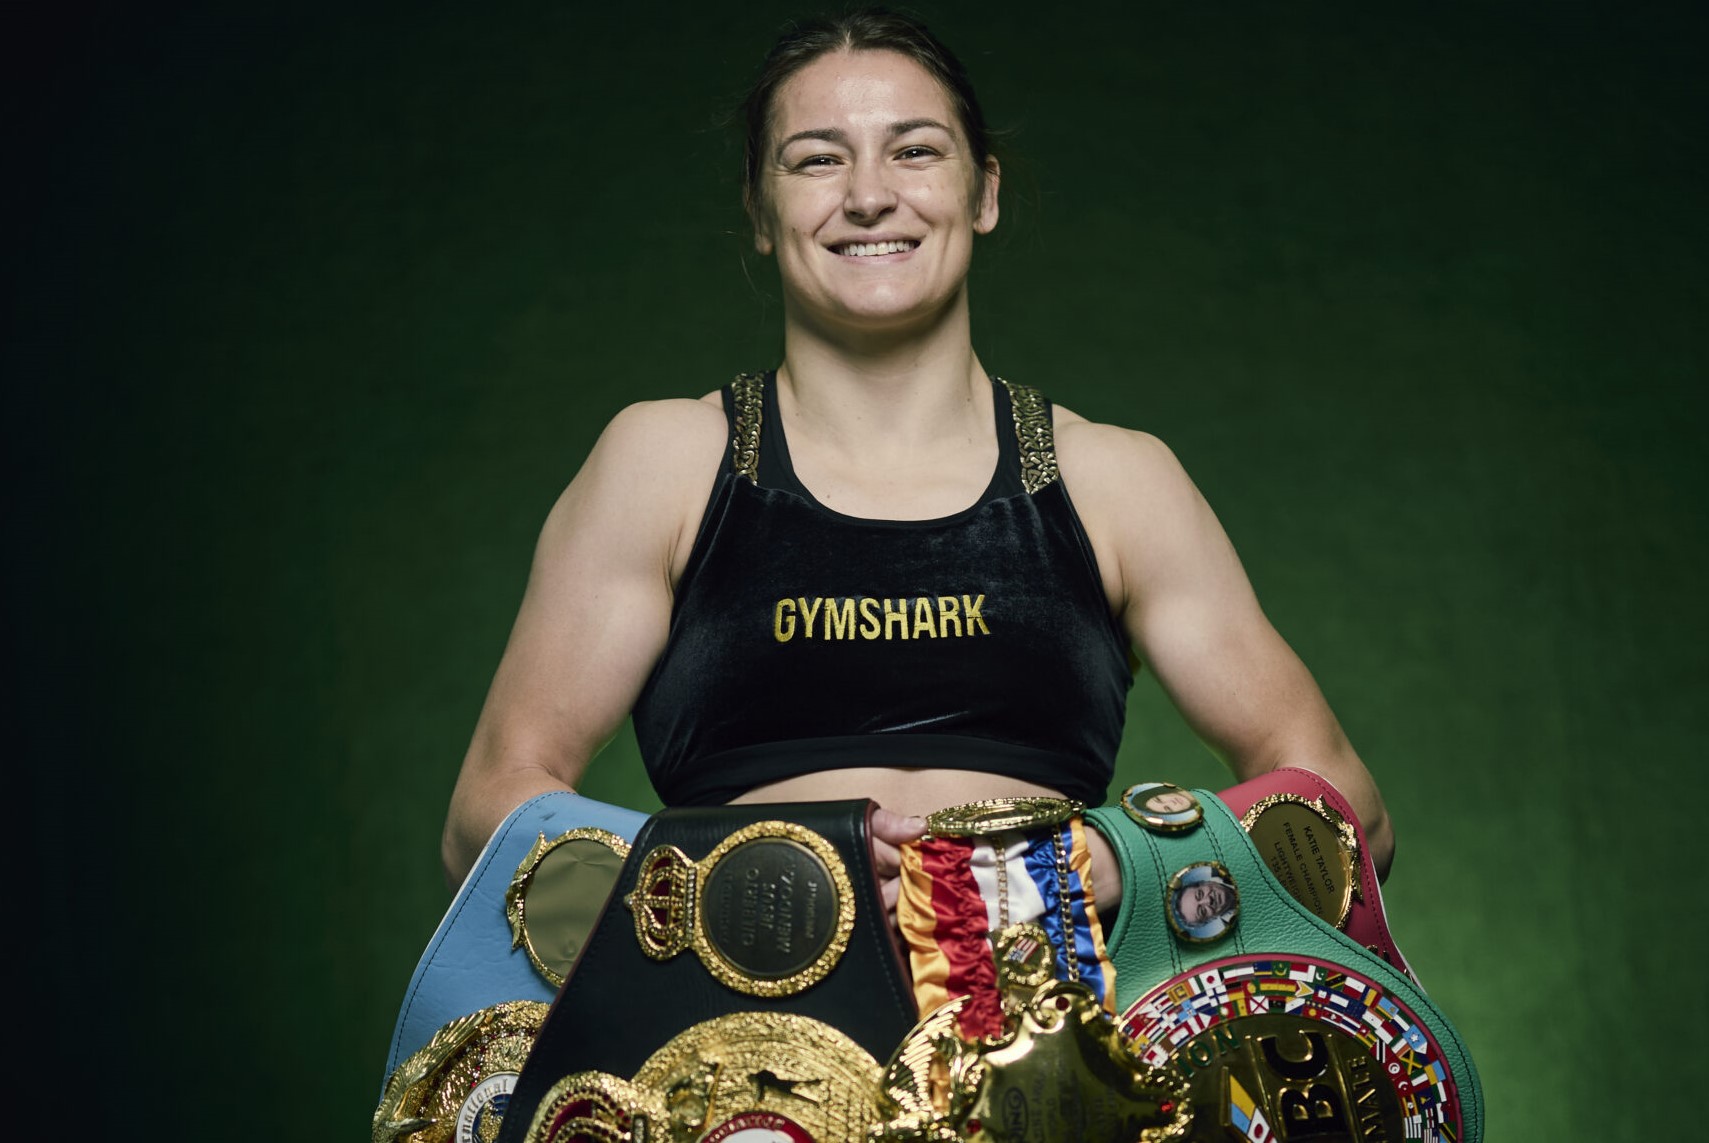 23 Captivating Facts About Katie Taylor - Facts.net